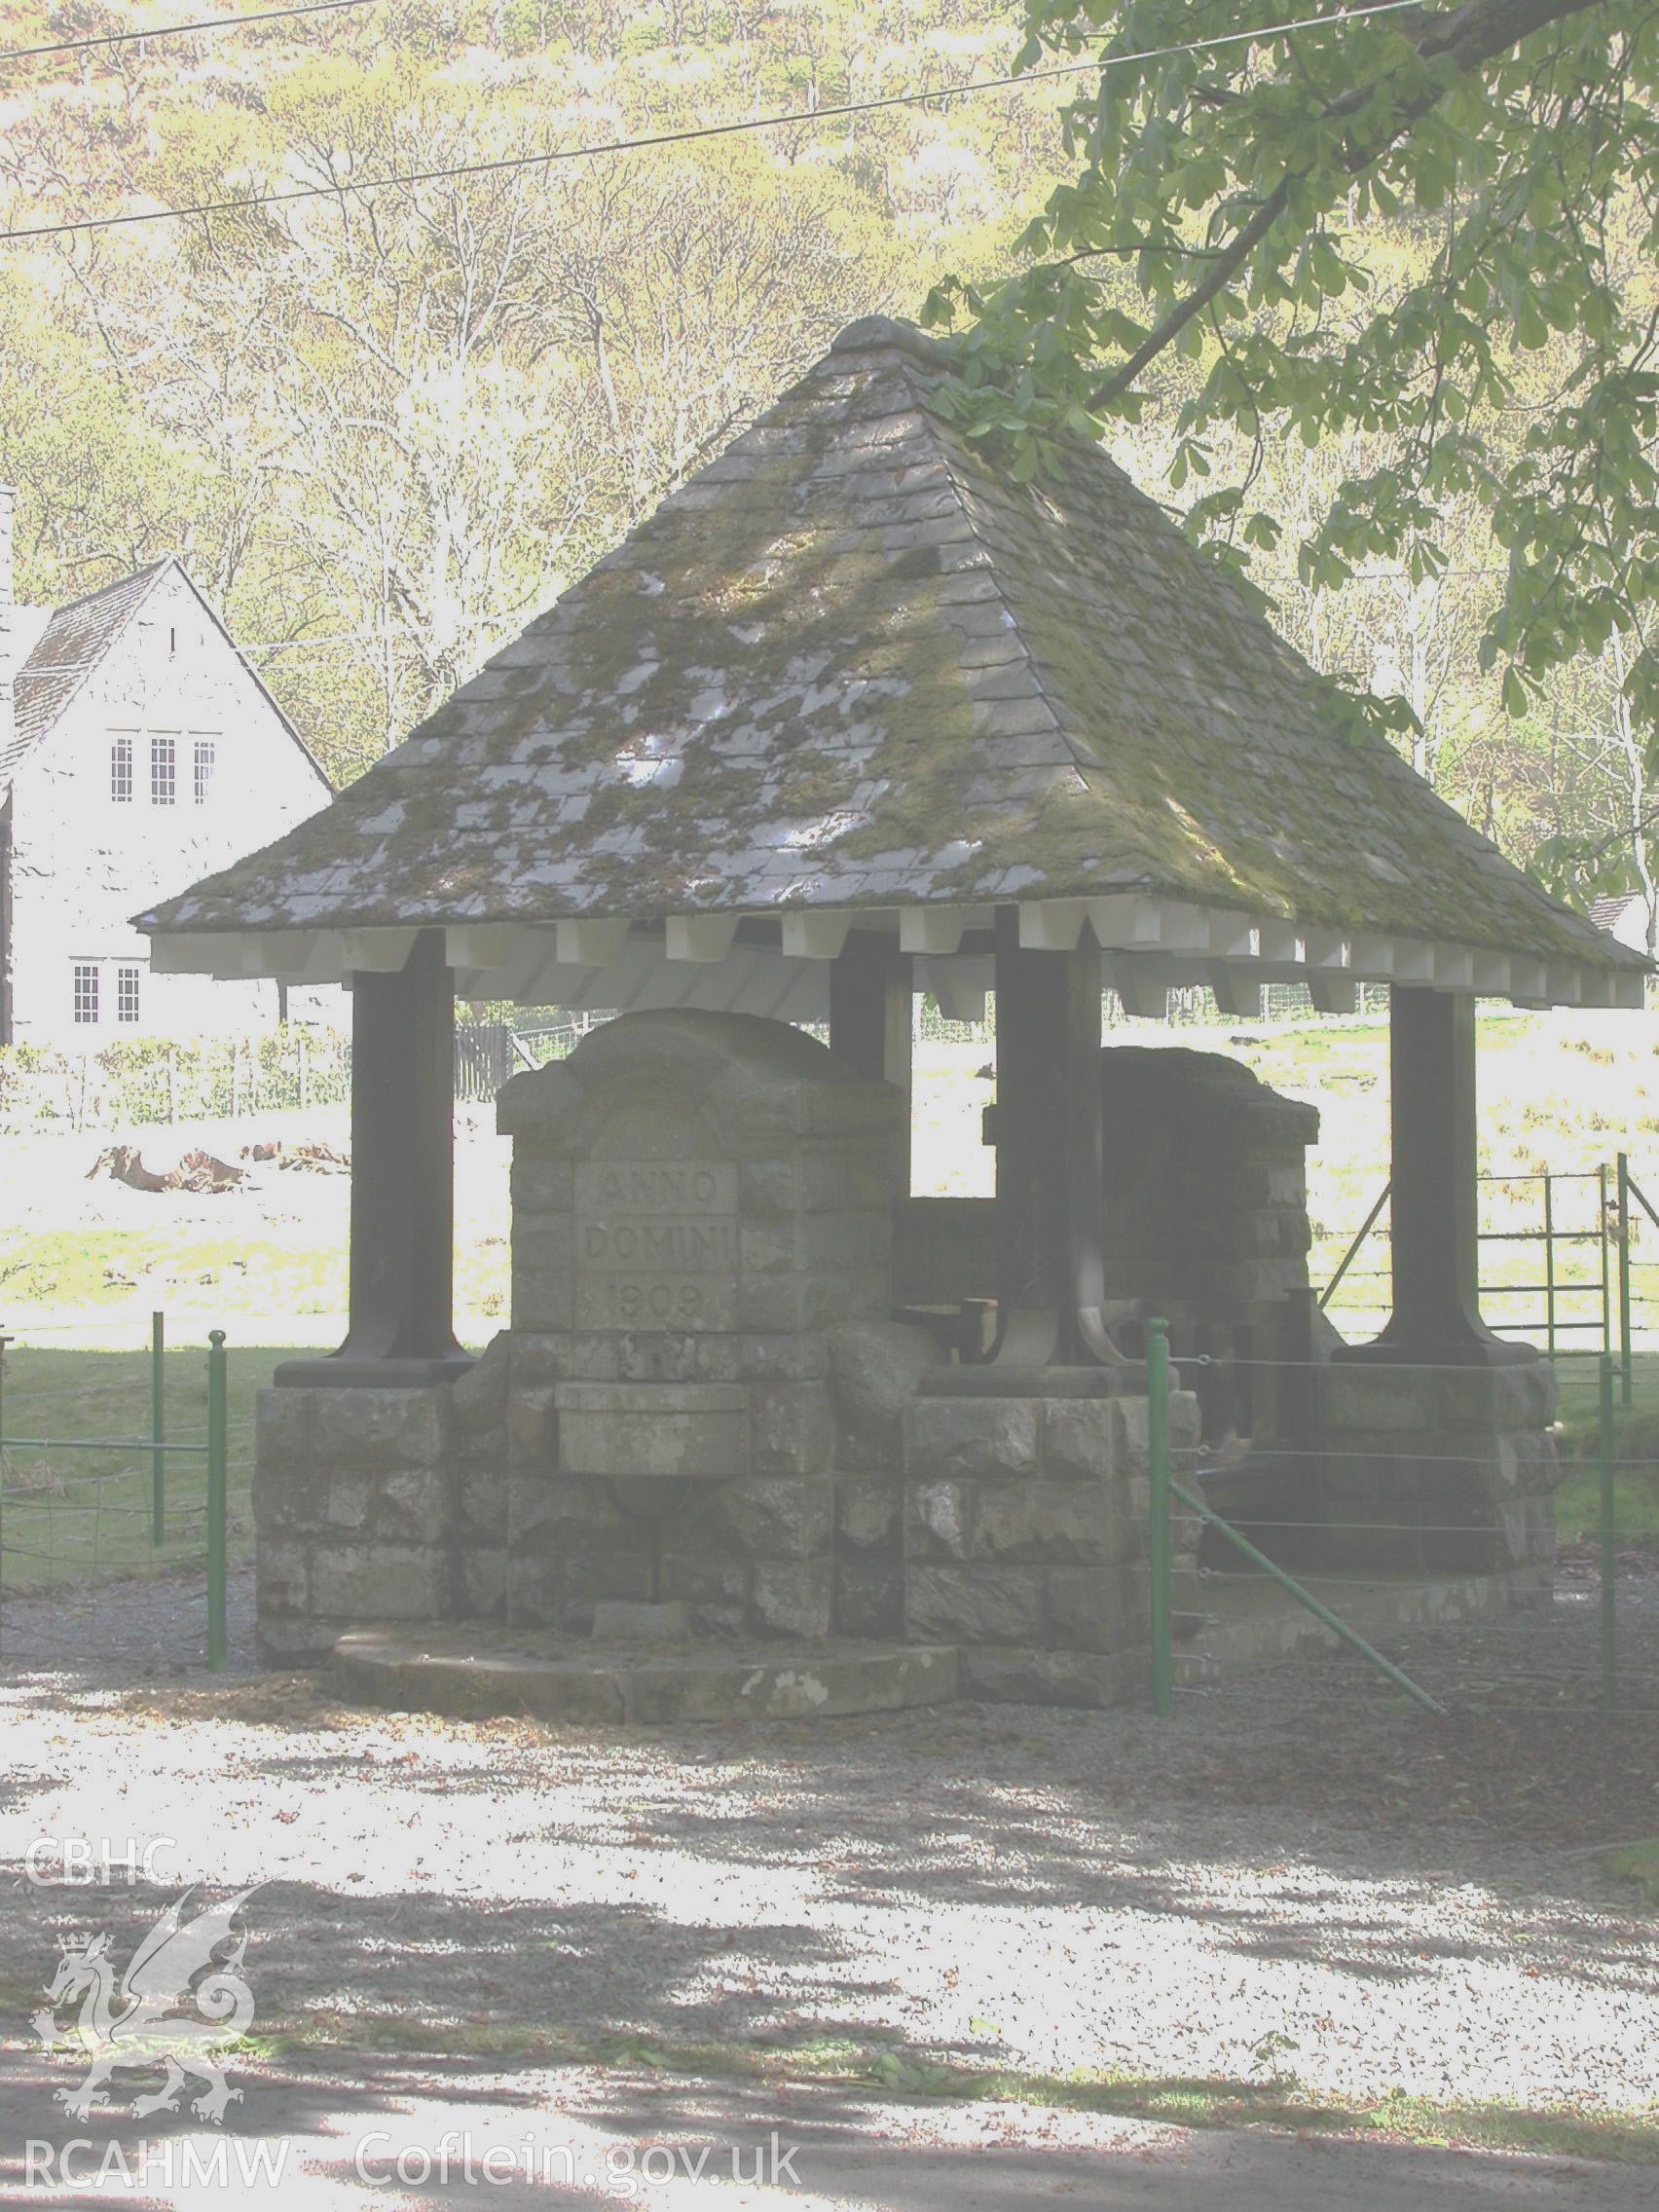 Village shelter and fountain from the west.